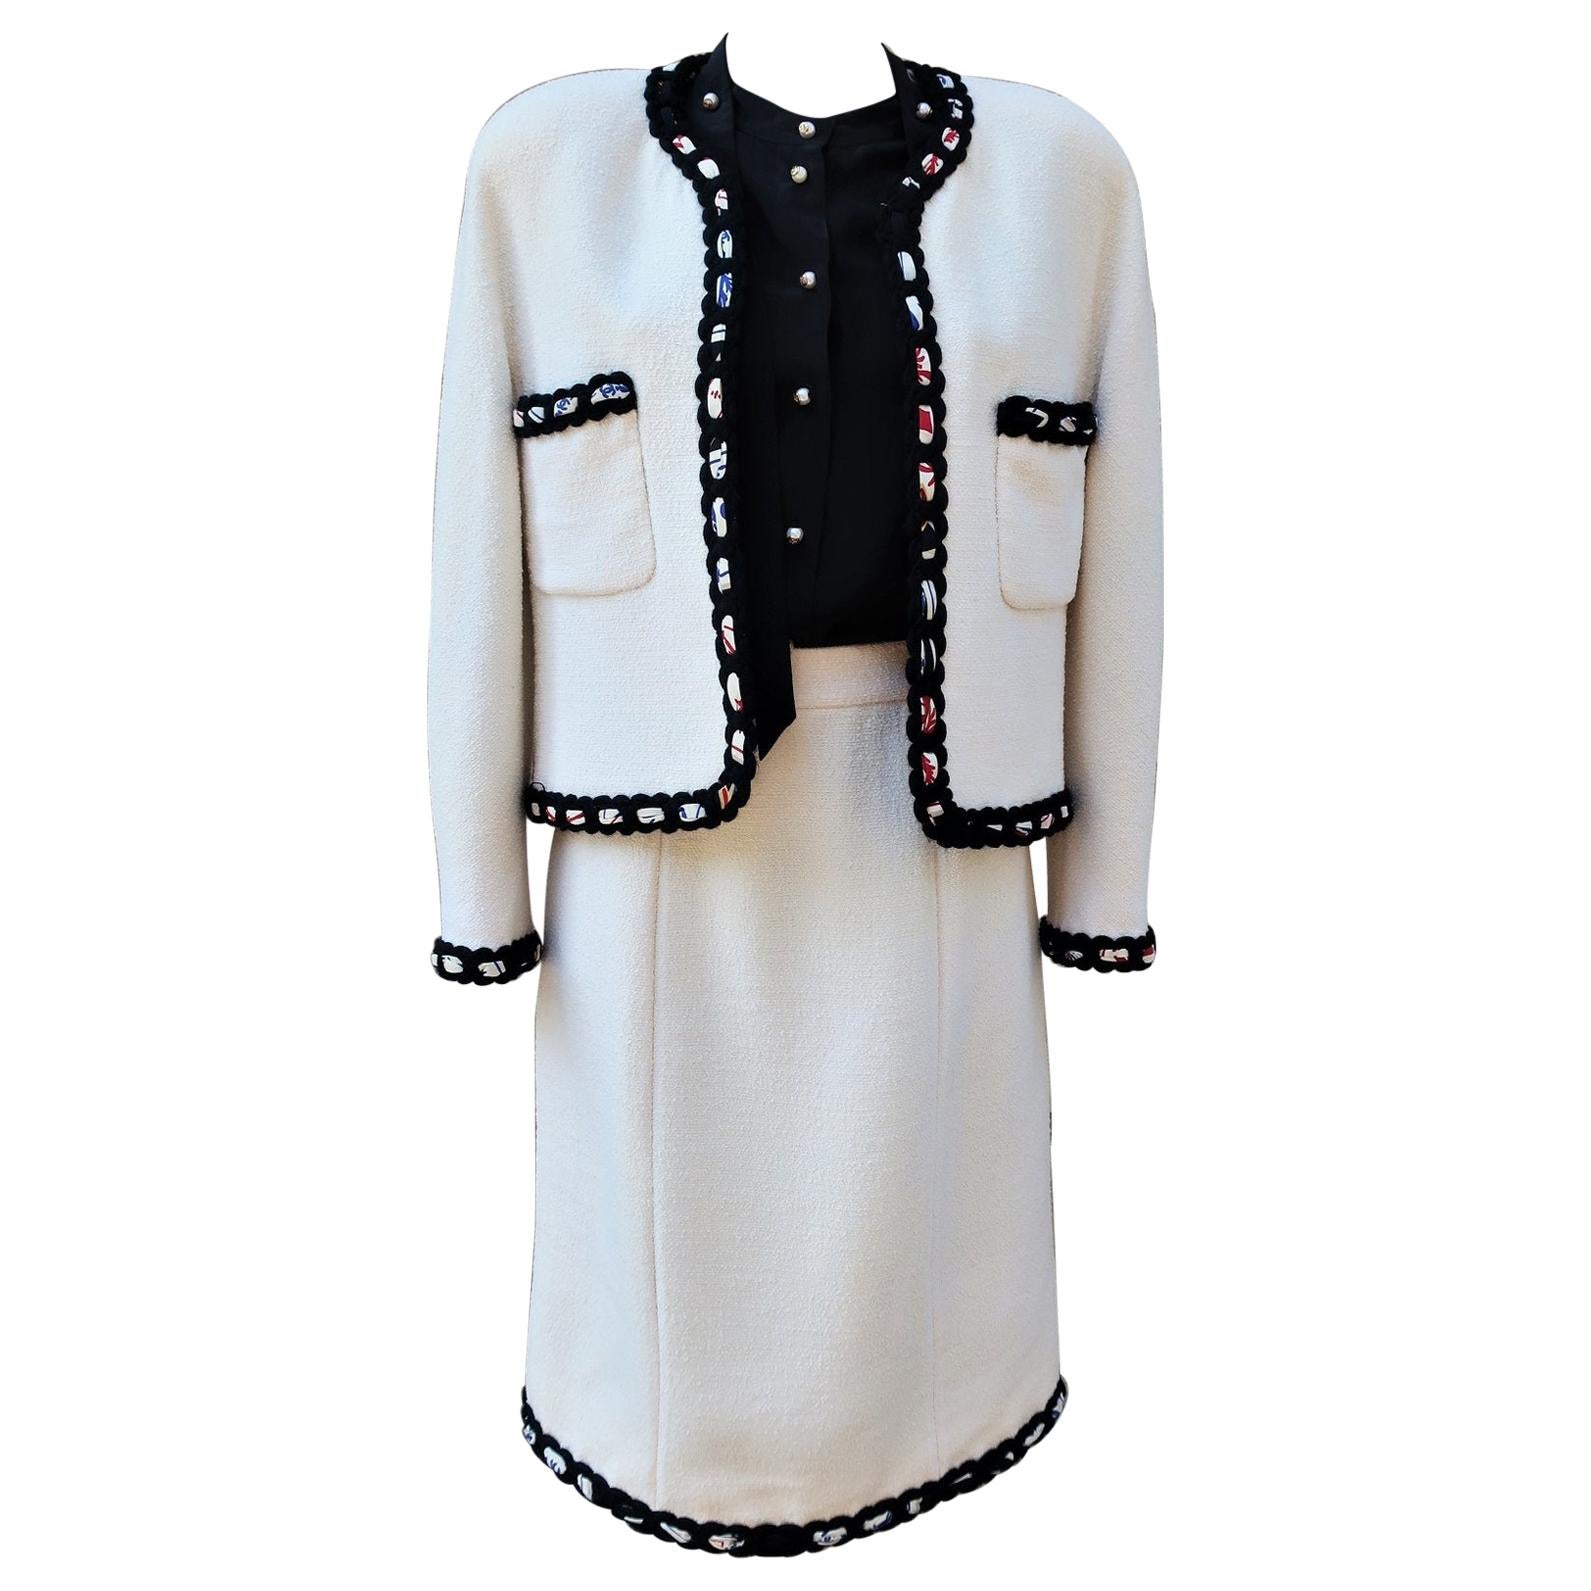 Chanel Couture White Quilted Black Logo Beaded Jacket Dress Suit 38 US4 40  US6  eBay